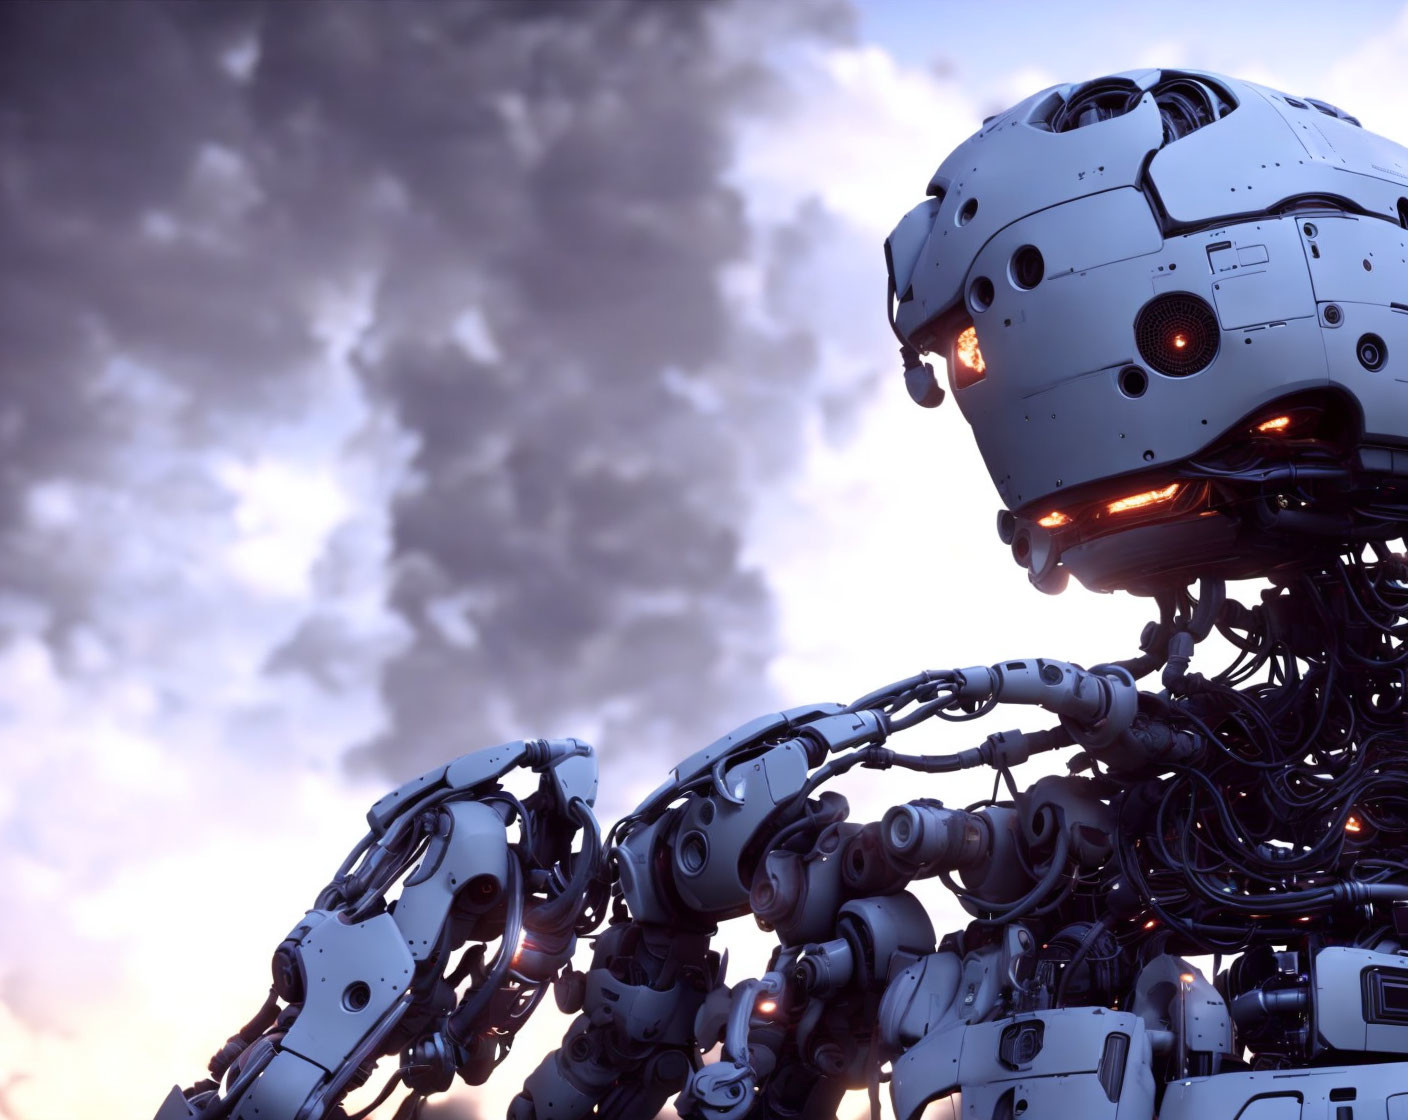 Detailed Humanoid Robot with Intricate Neck Wiring Against Dramatic Dusk Sky